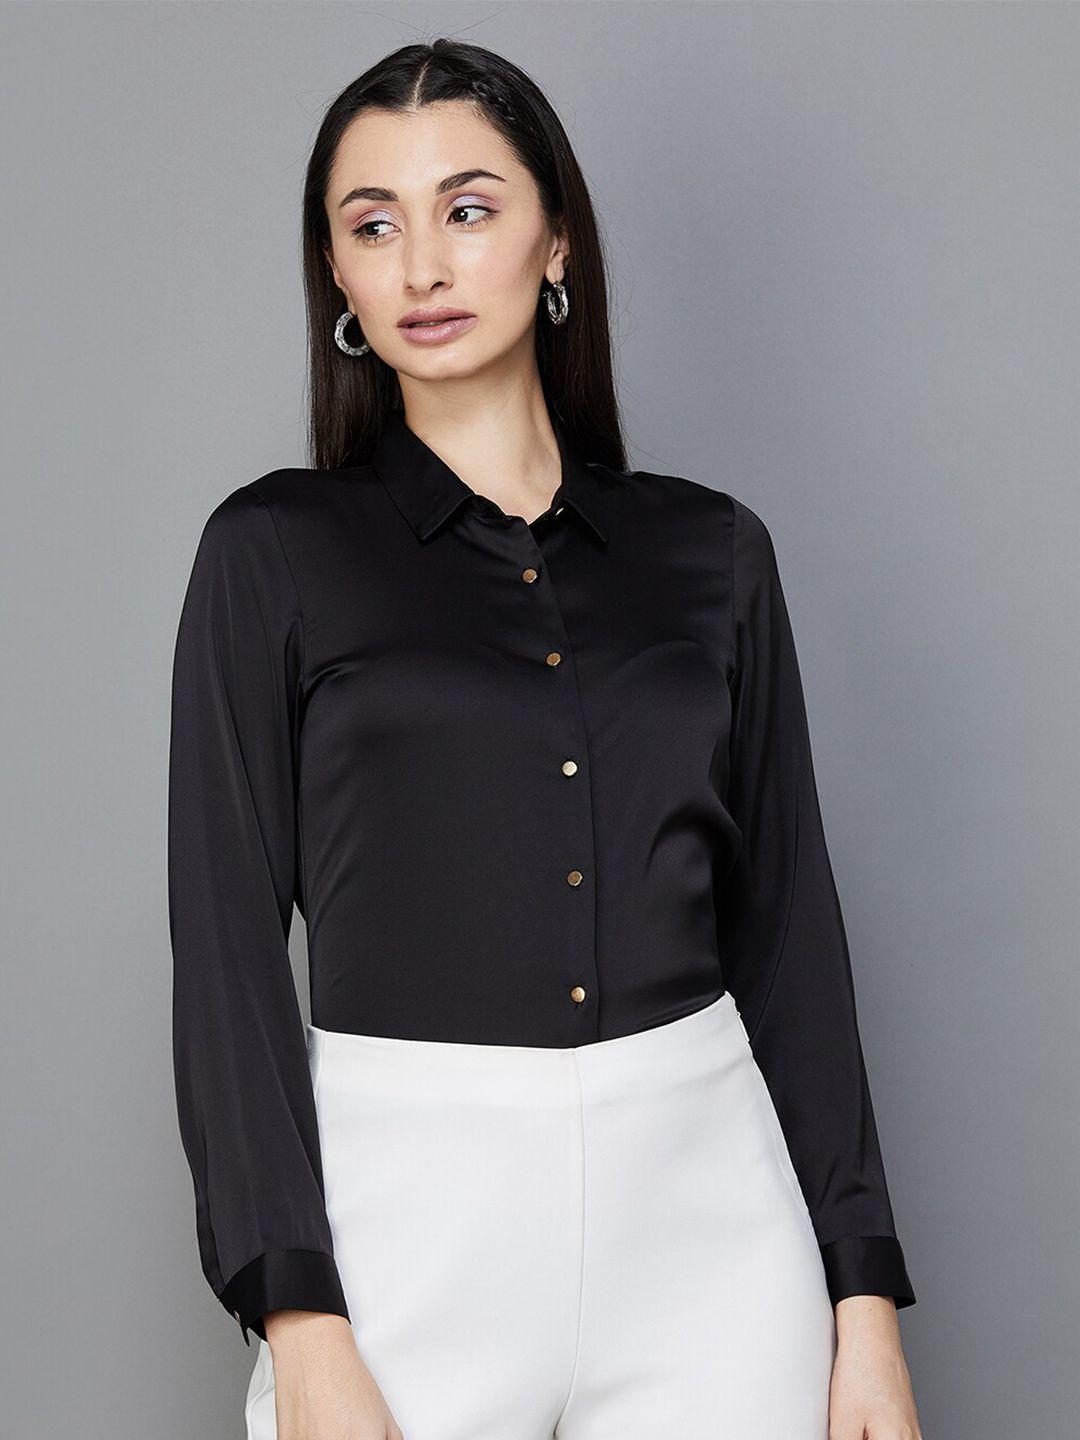 code by lifestyle cuffed sleeves shirt style top